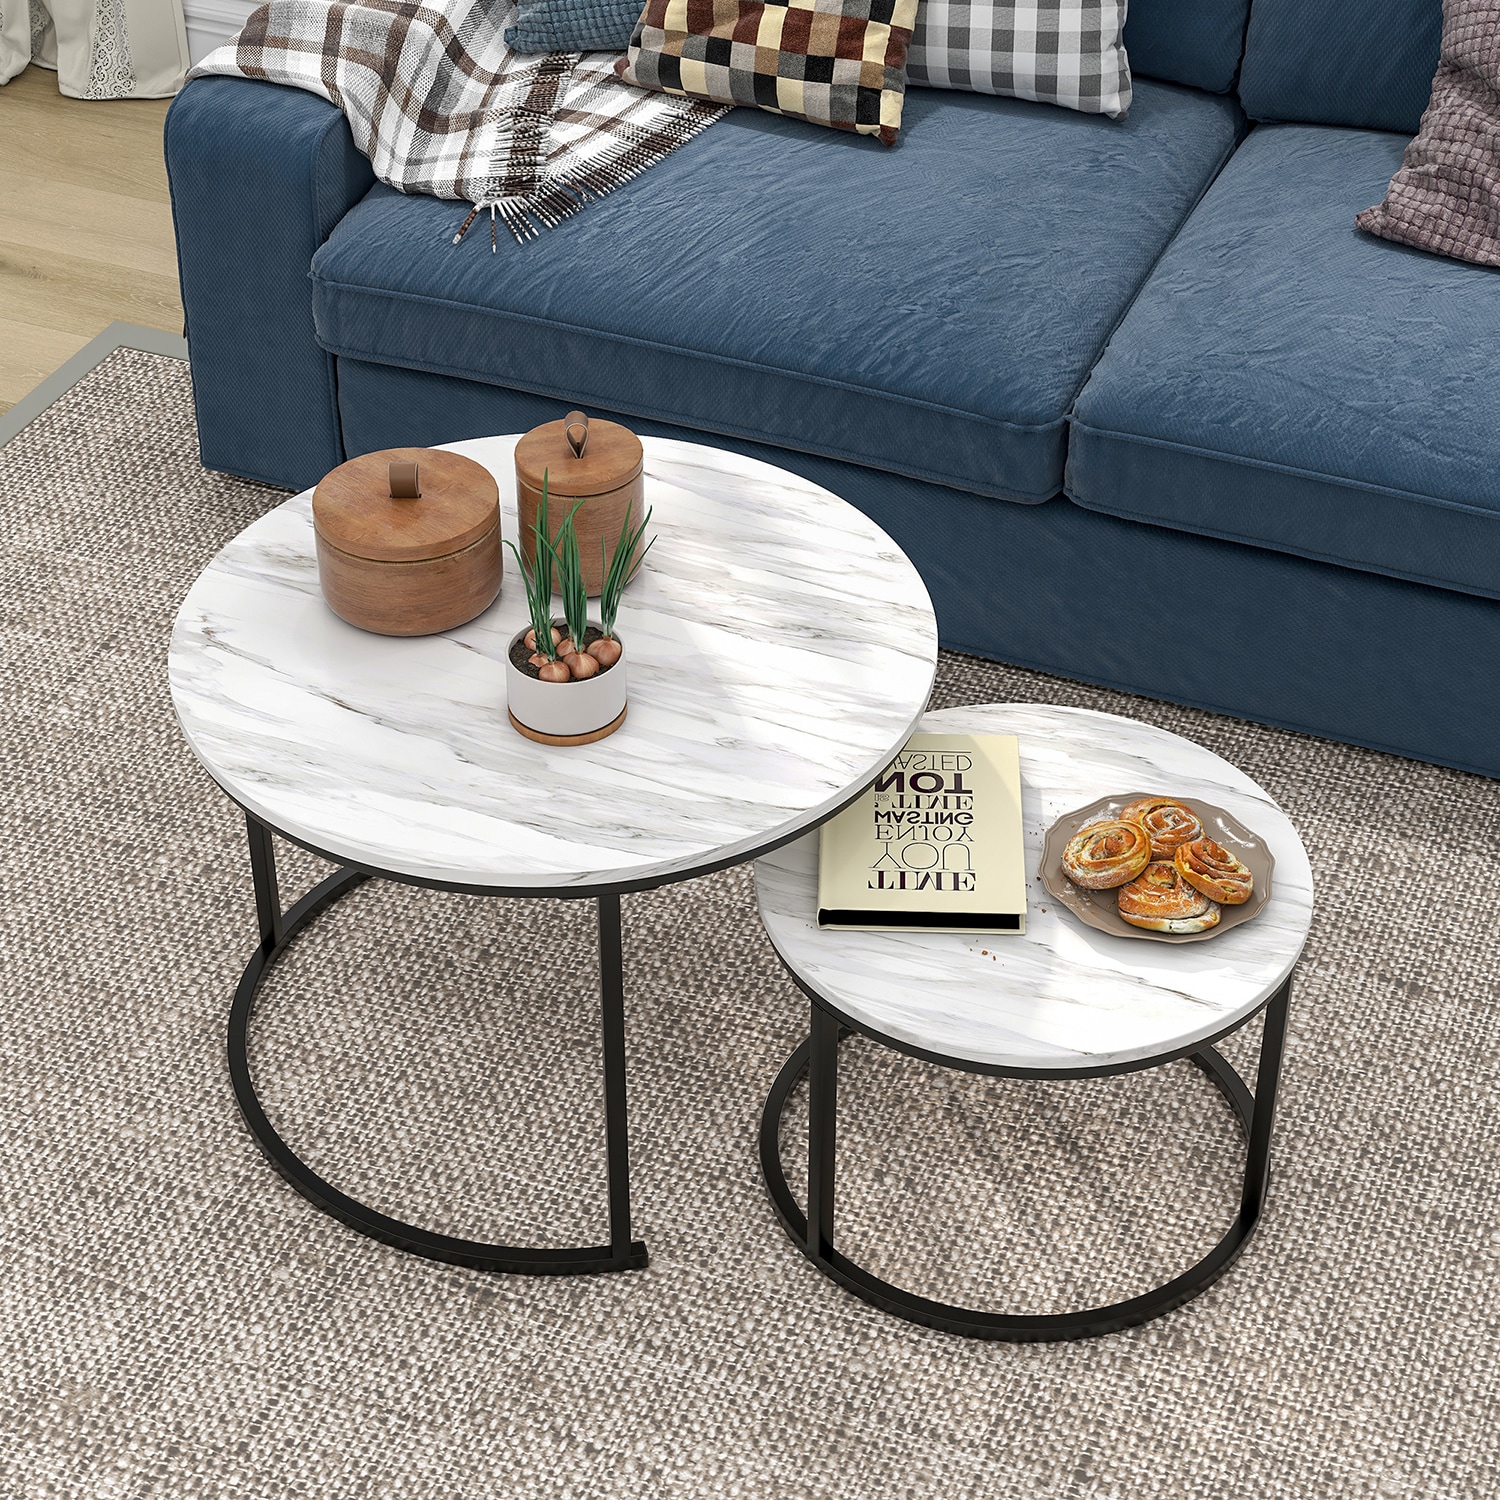 End Tables at Lowes.com